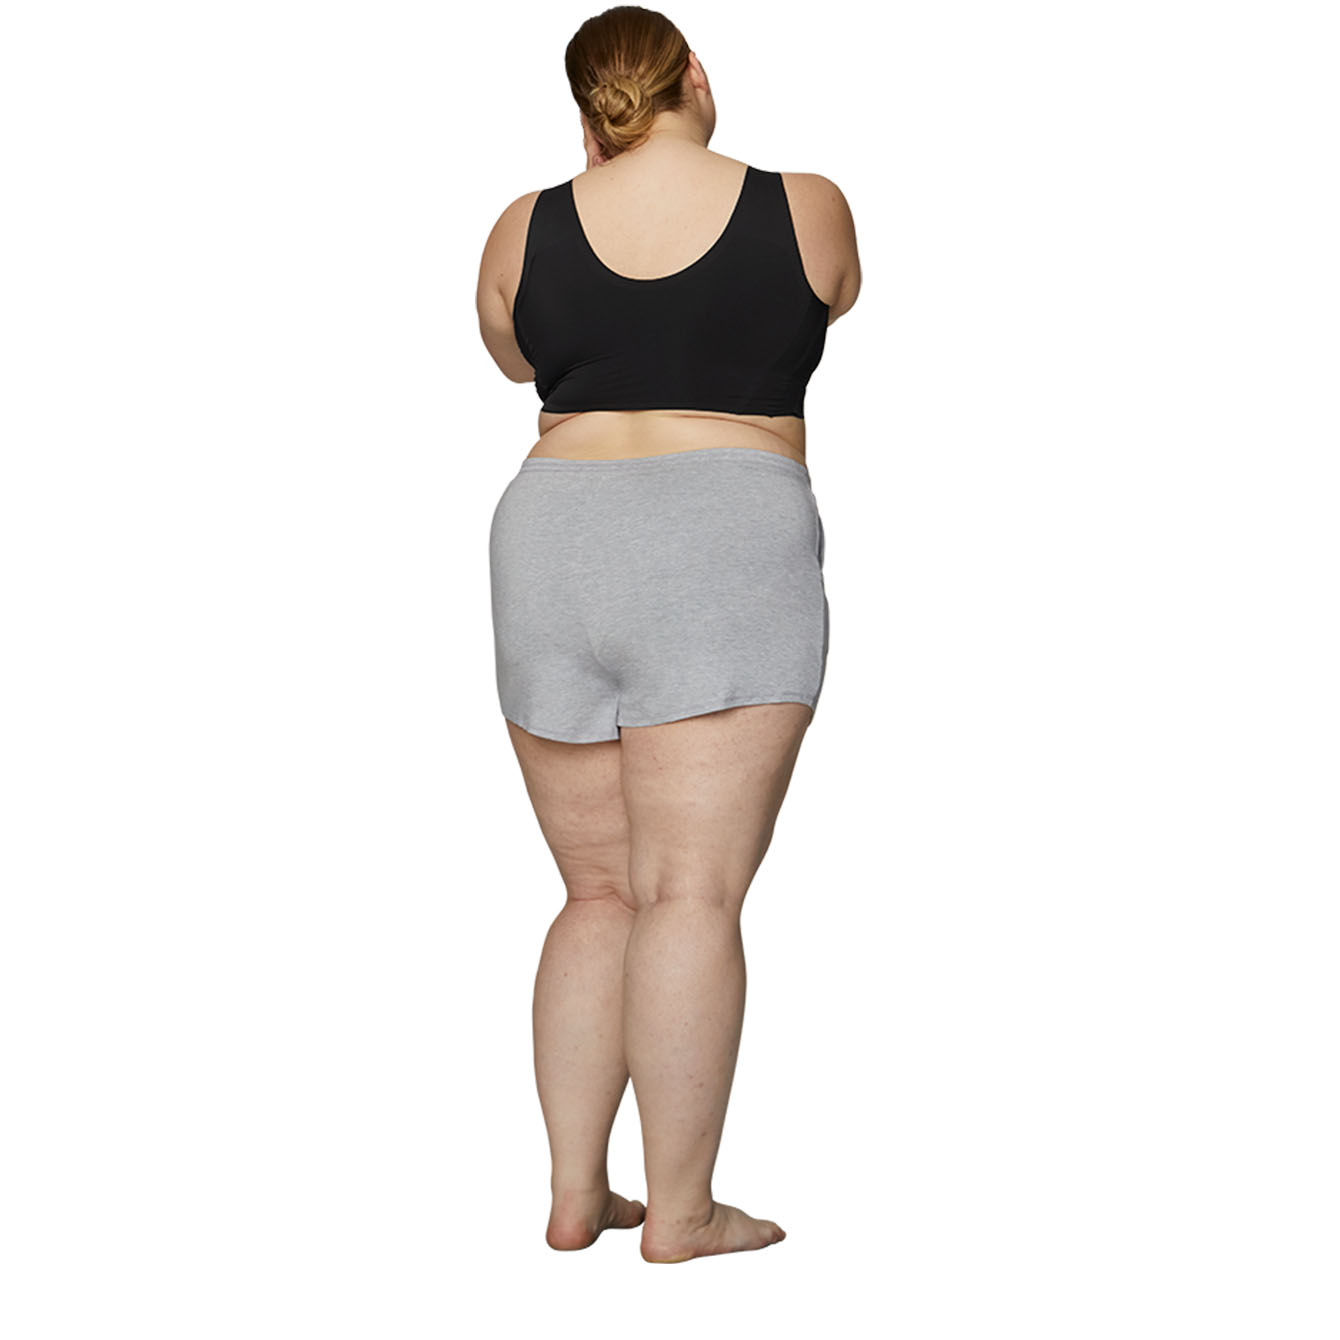 Thinx Sleep Shorts Review: Do they work? – PhD in Clothes